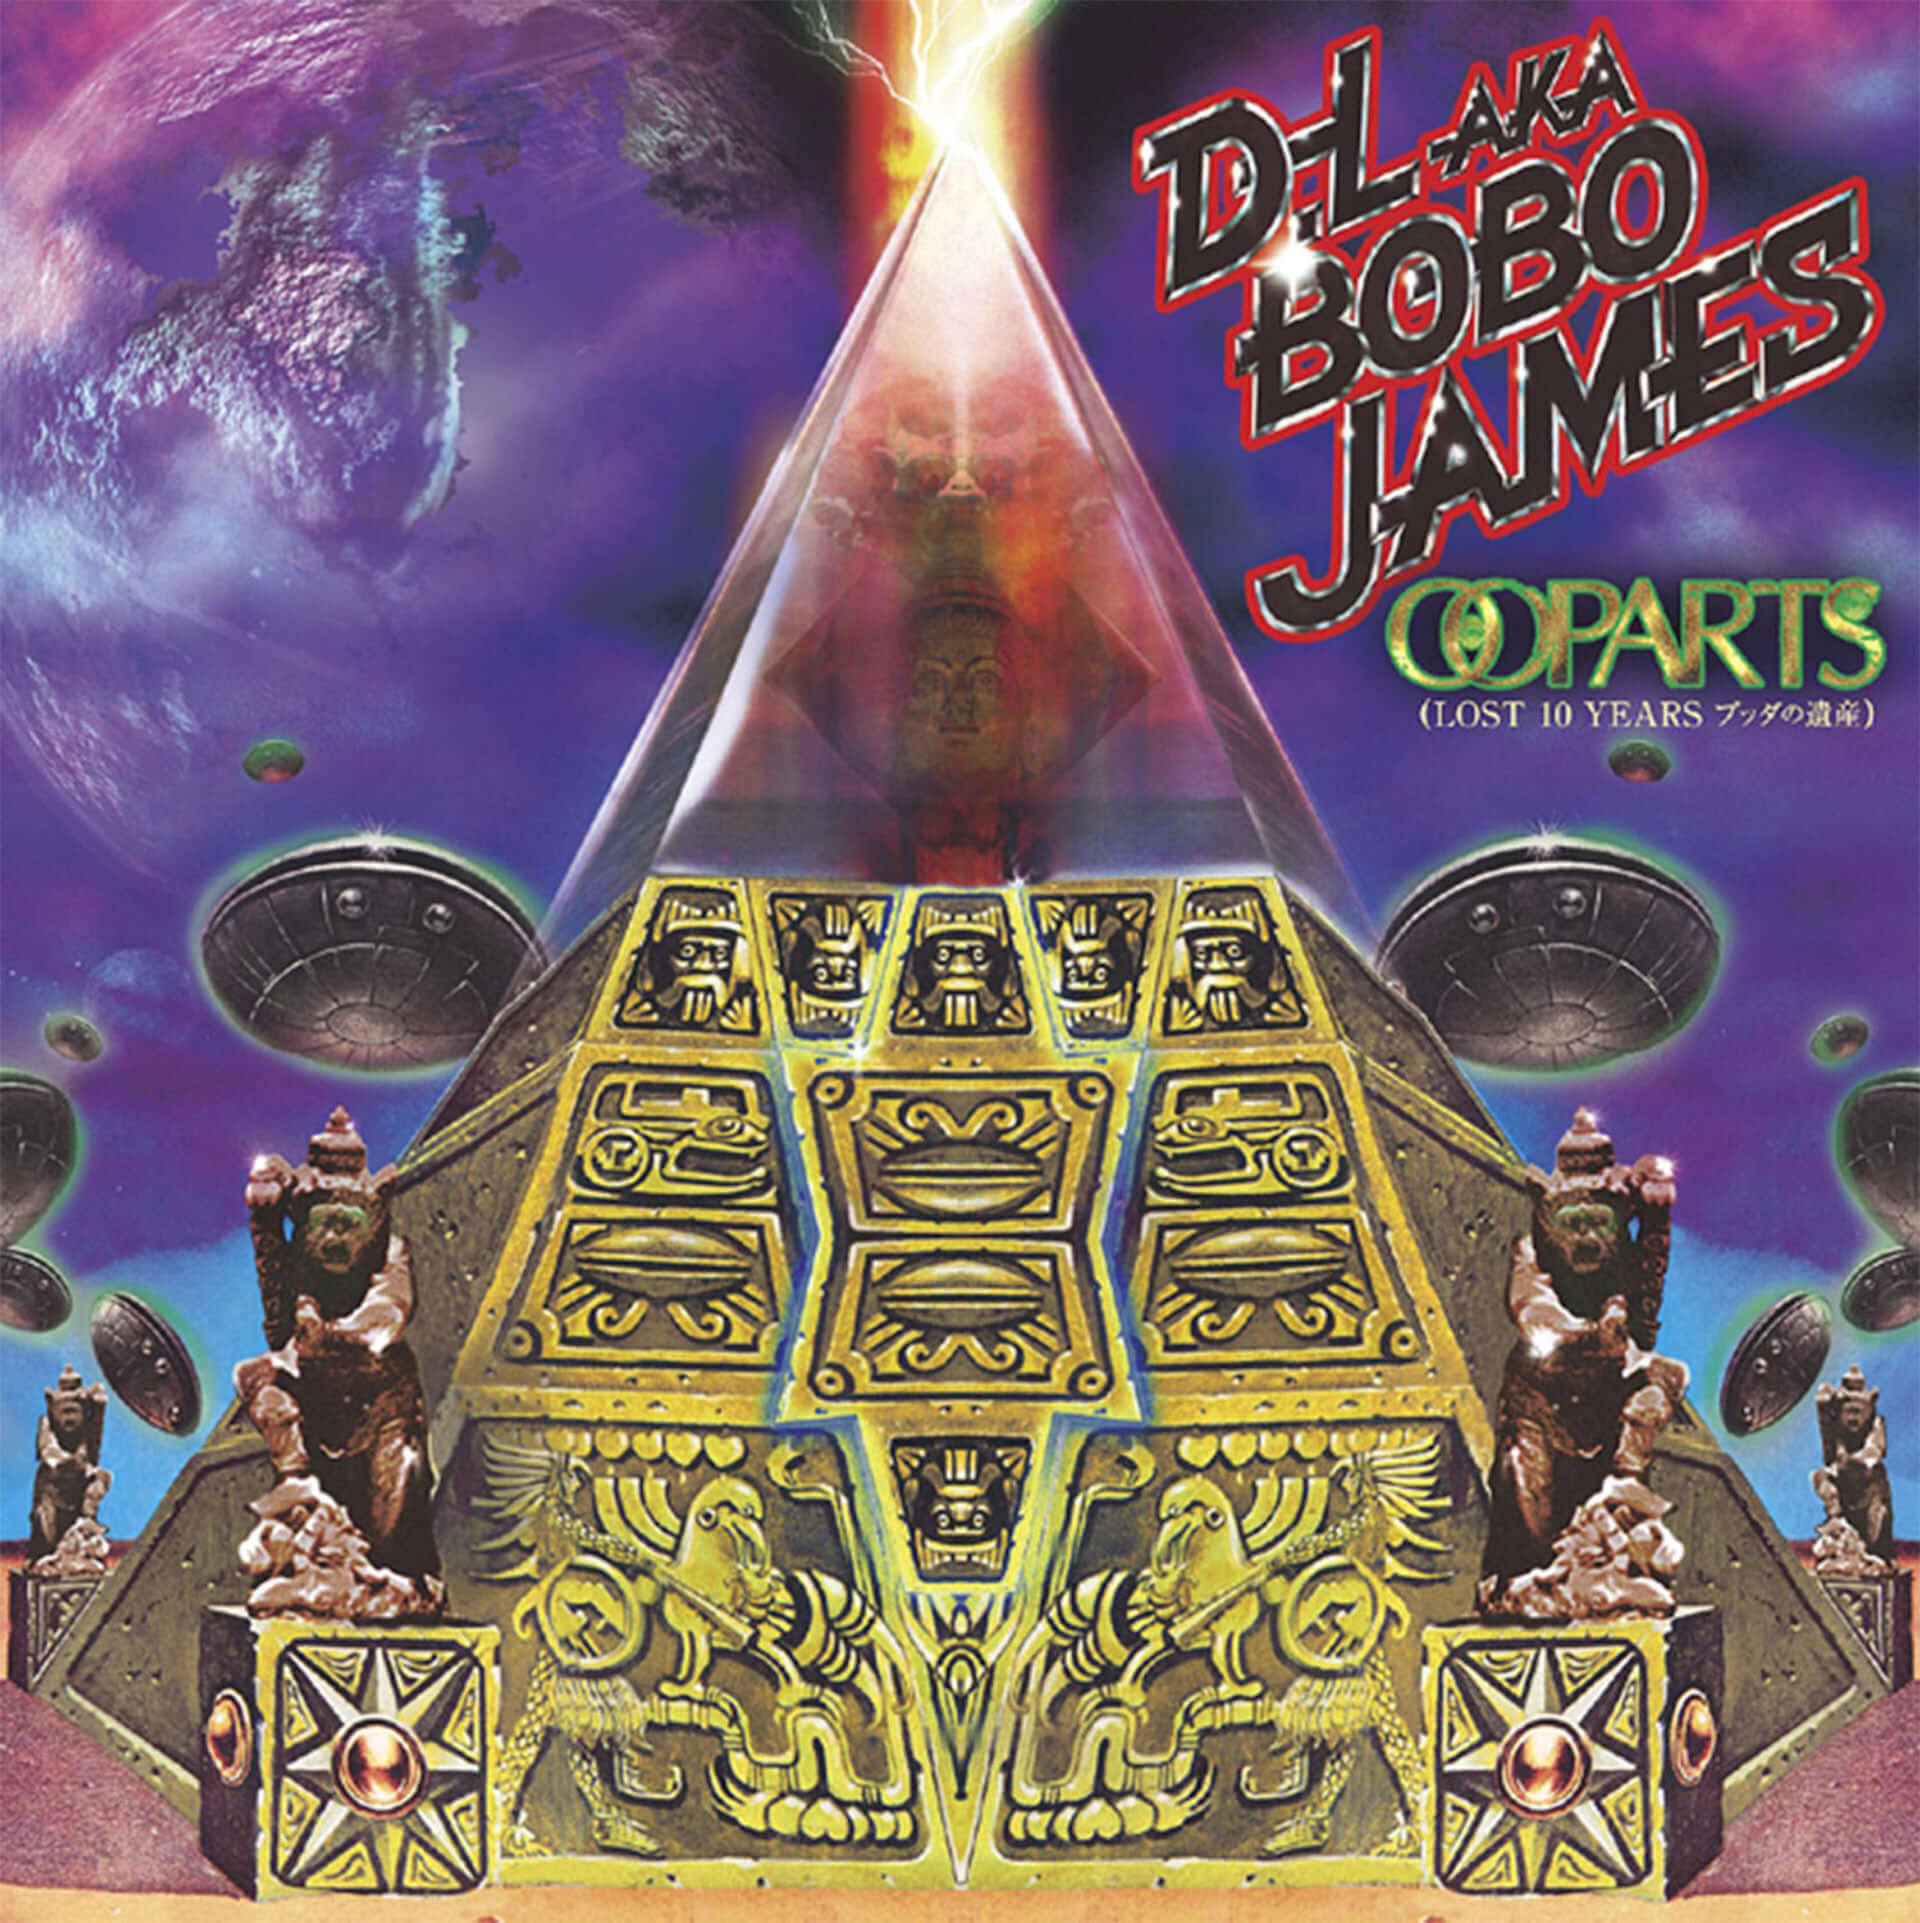 D.L a.k.a. BOBO JAMES『OOPARTS（LOST 10 YEARS ブッダの遺産）』再発に加え、CQの1stソロアルバム『NAUTILUS ～恋する潜水艦～』の発売が決定 music191031_oopartscq_01-1920x1923